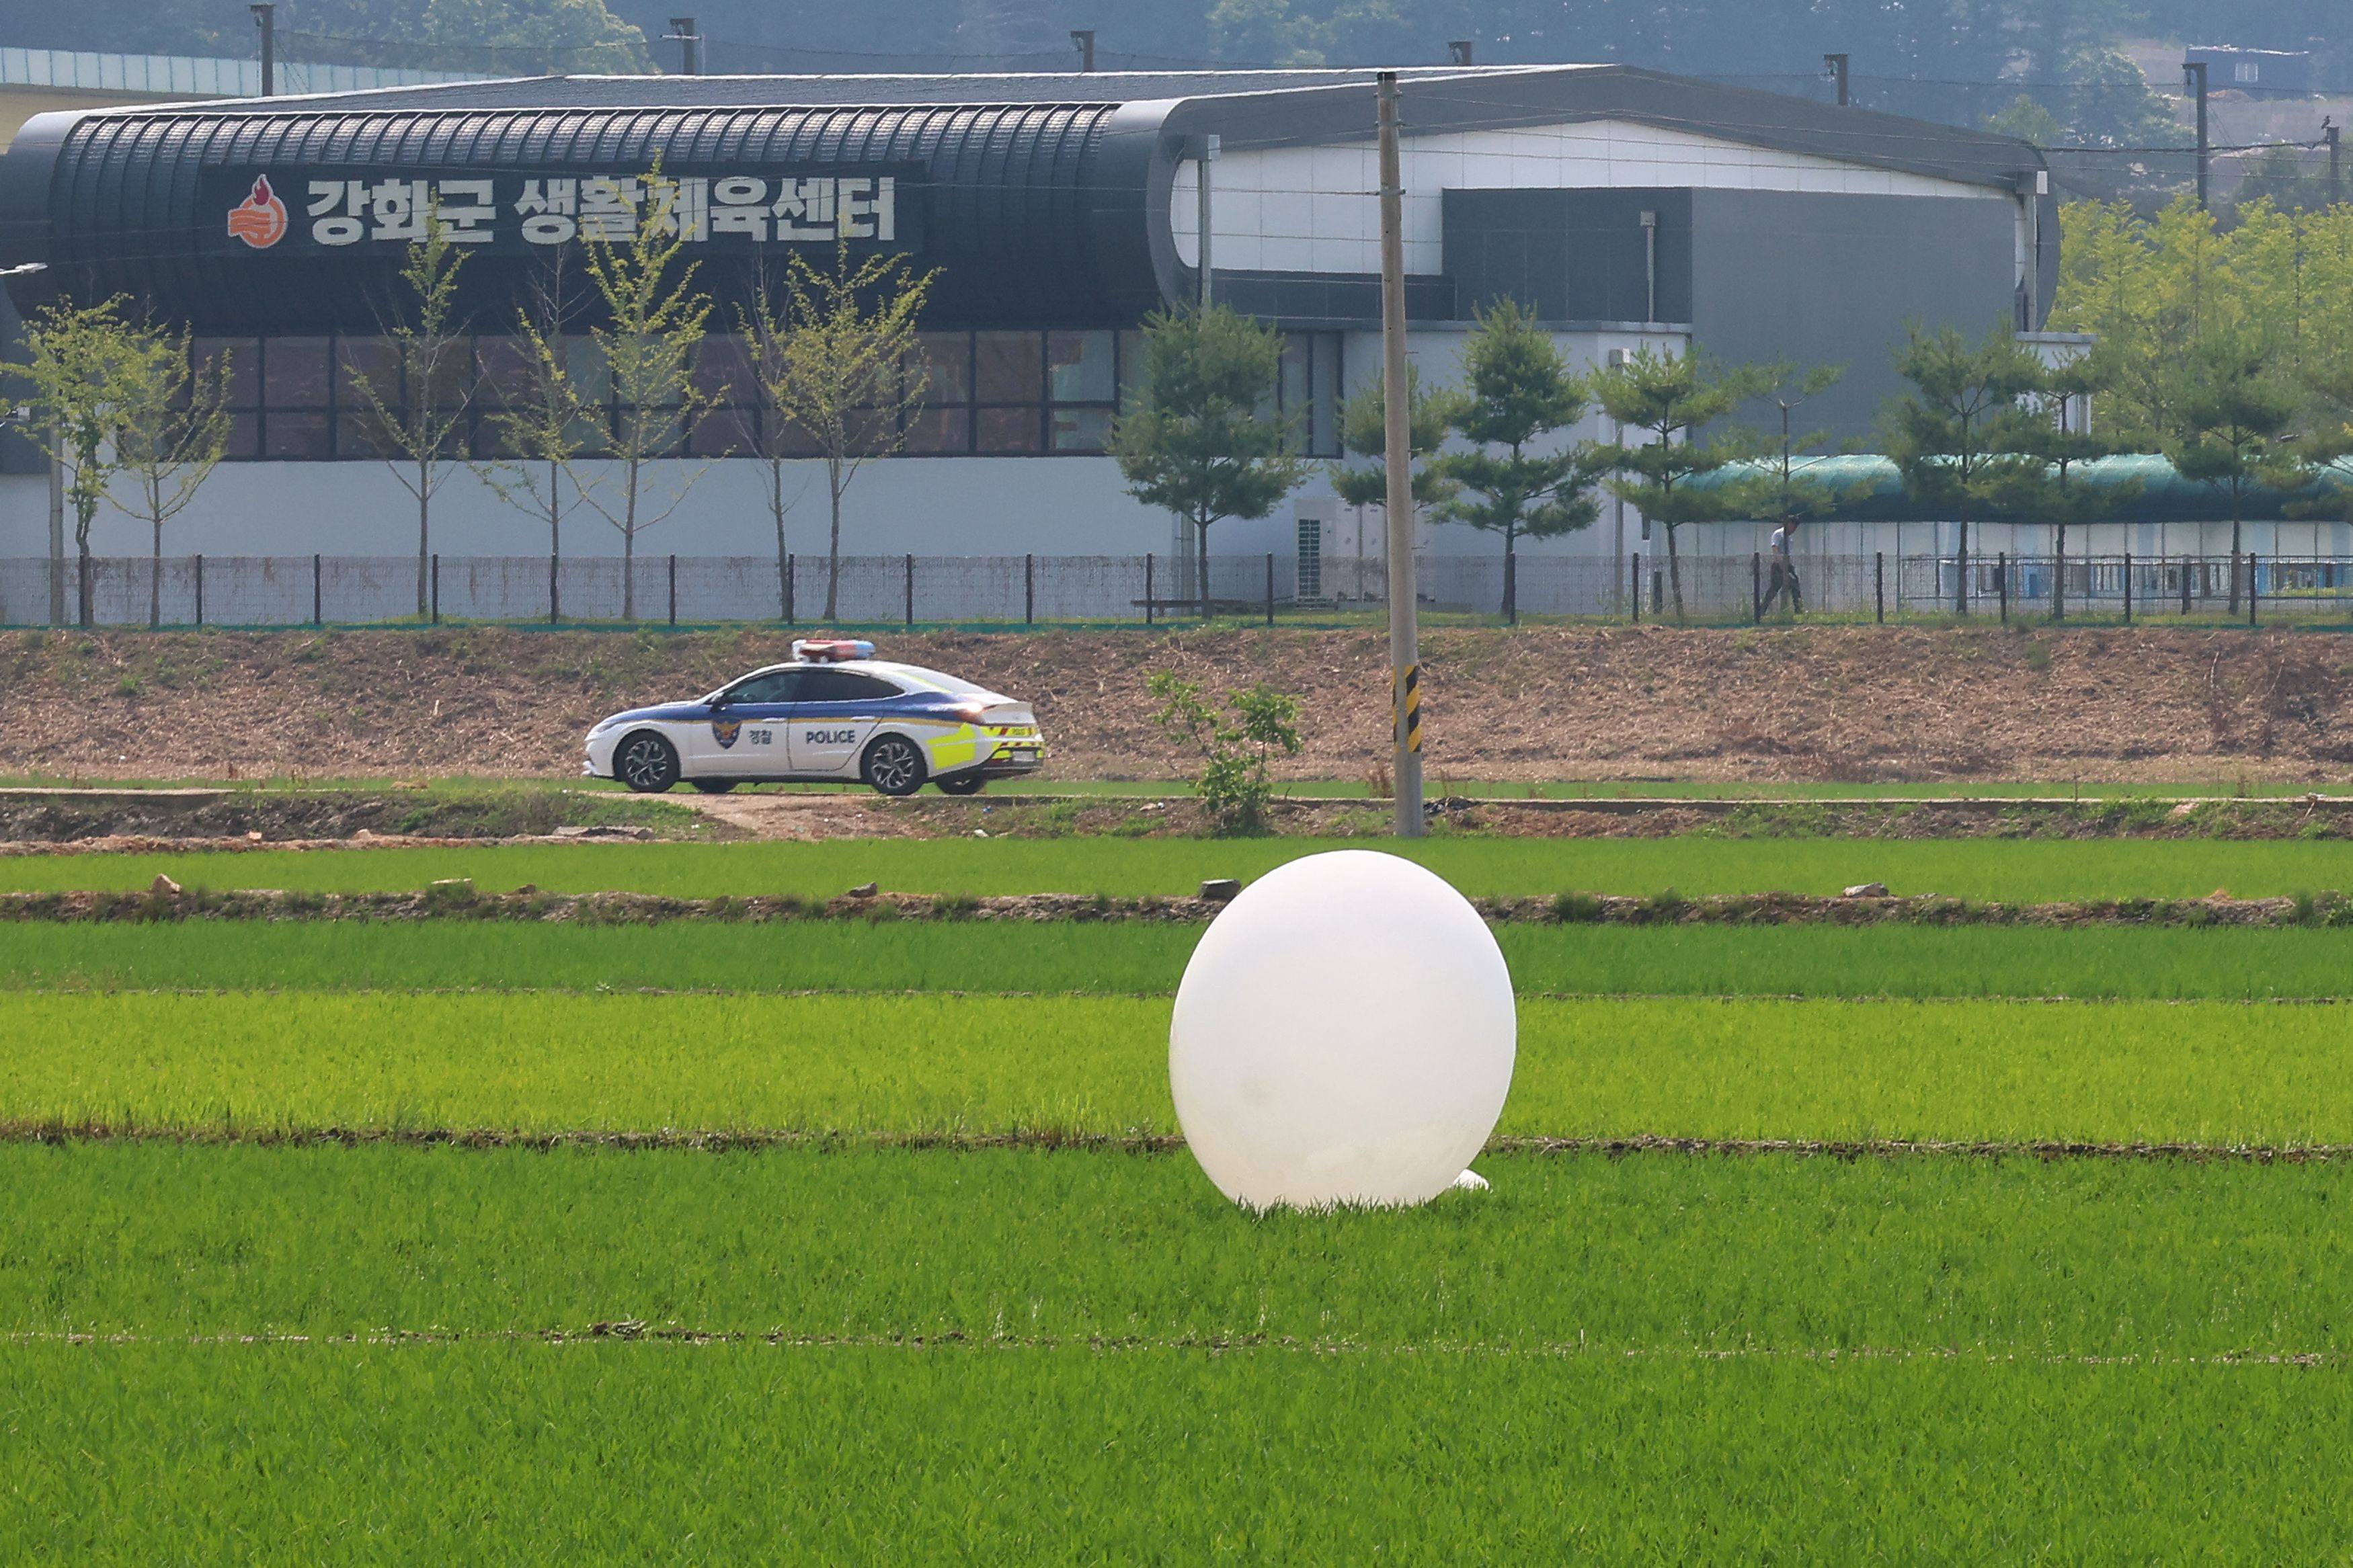 A police car drives past a balloon after it lands in a rice field in Ganghwa county, in the city of Incheon, South Korea, on June 10. North Korea has sent more 1,000 trash-carrying balloons over the border. Photo: AFP